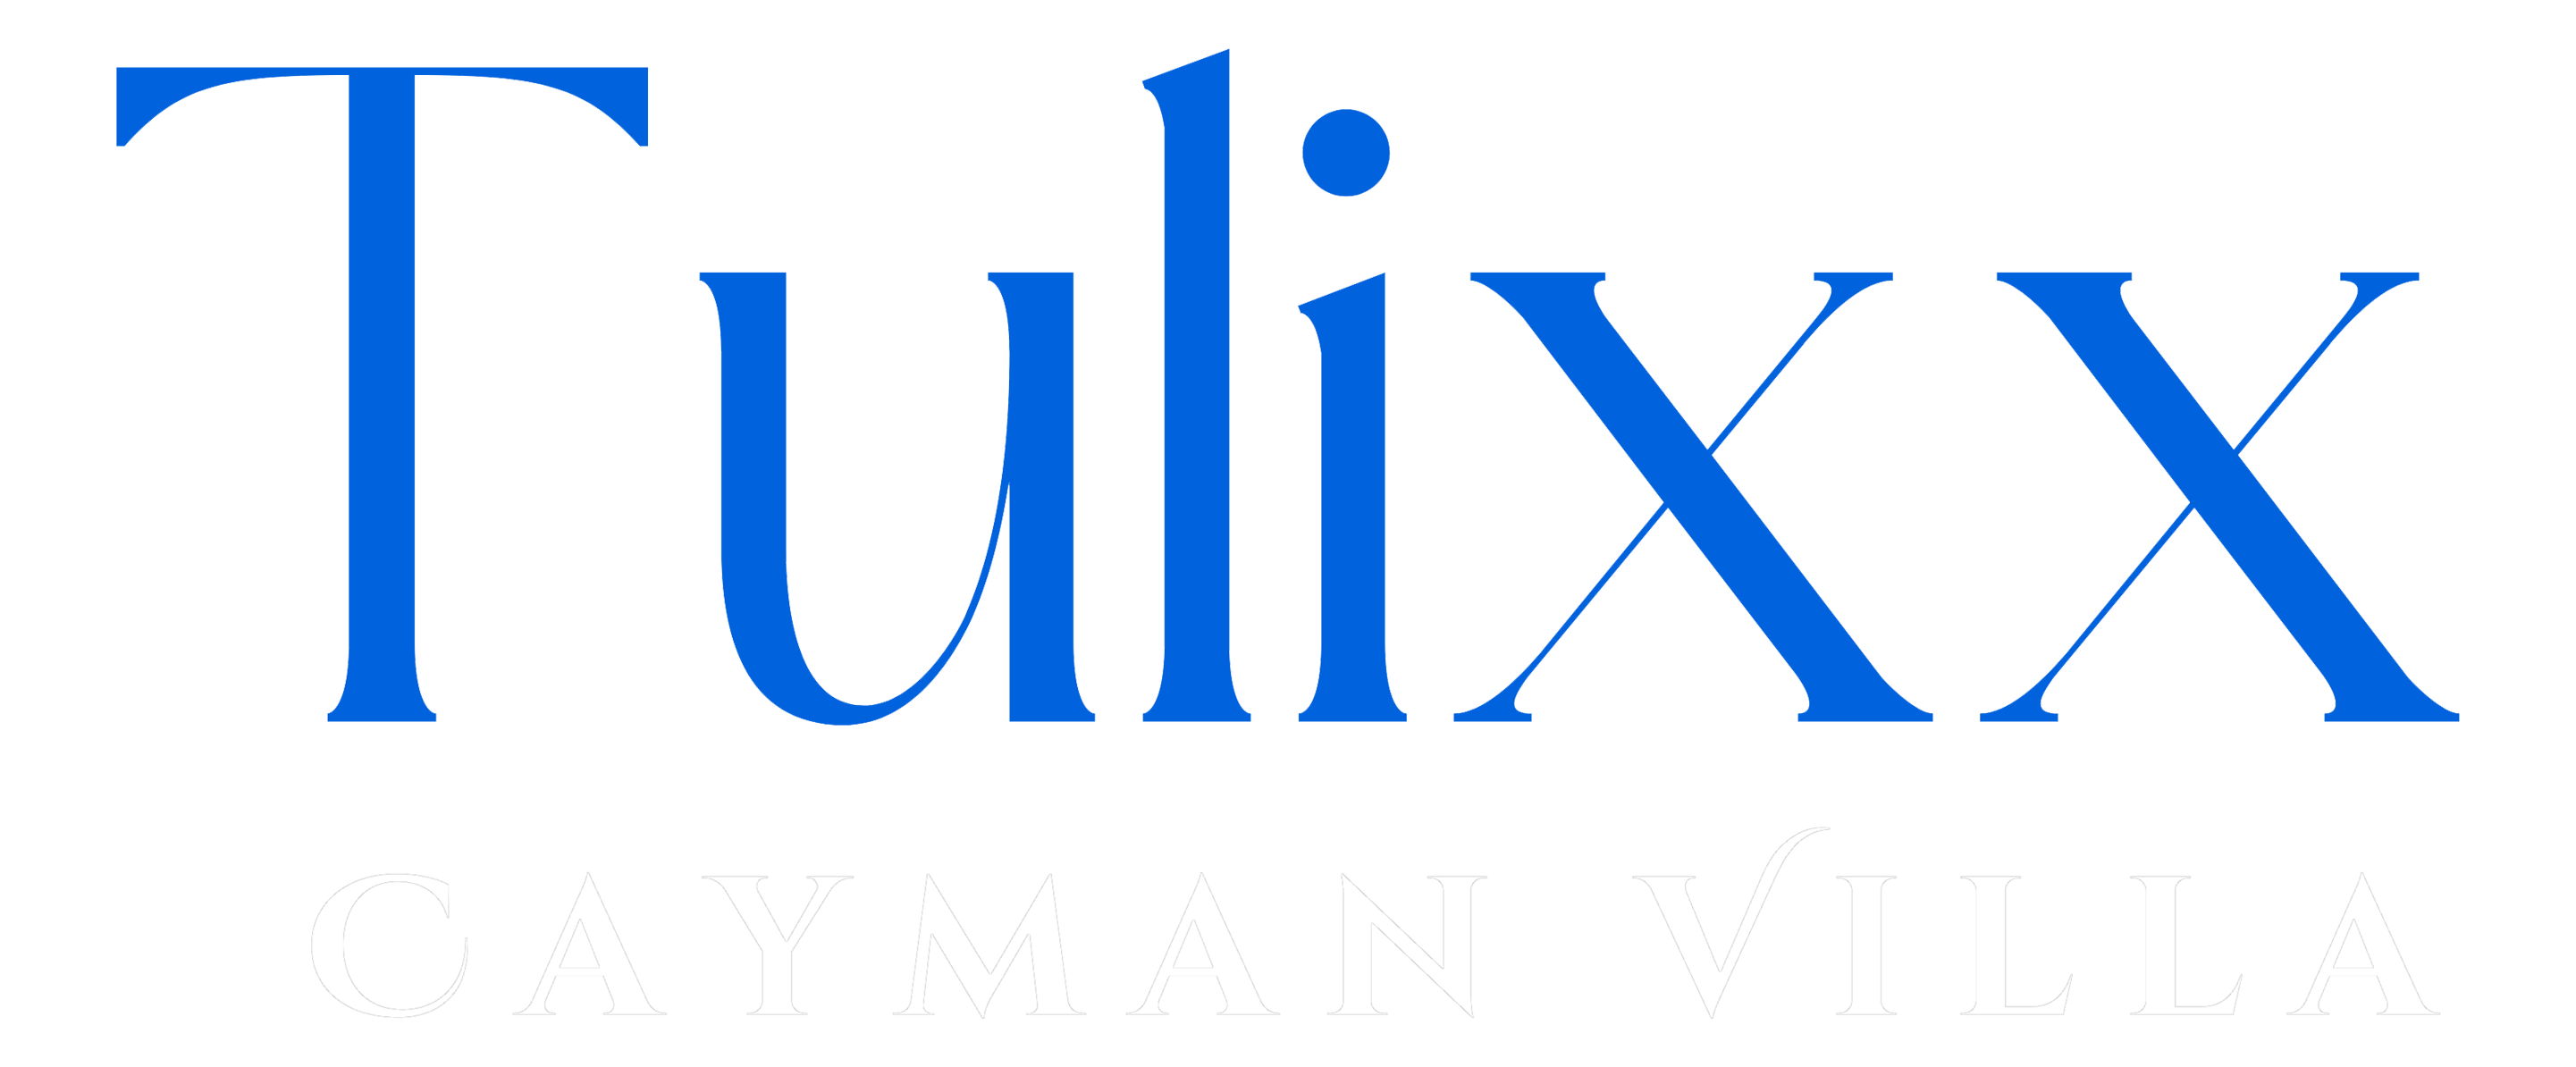 Tulixx logo, Tulixx cayman villa, Best airbnb in cayman brac, best hotel in cayman brac, luxury villa in cayman, clean rooms for rent.